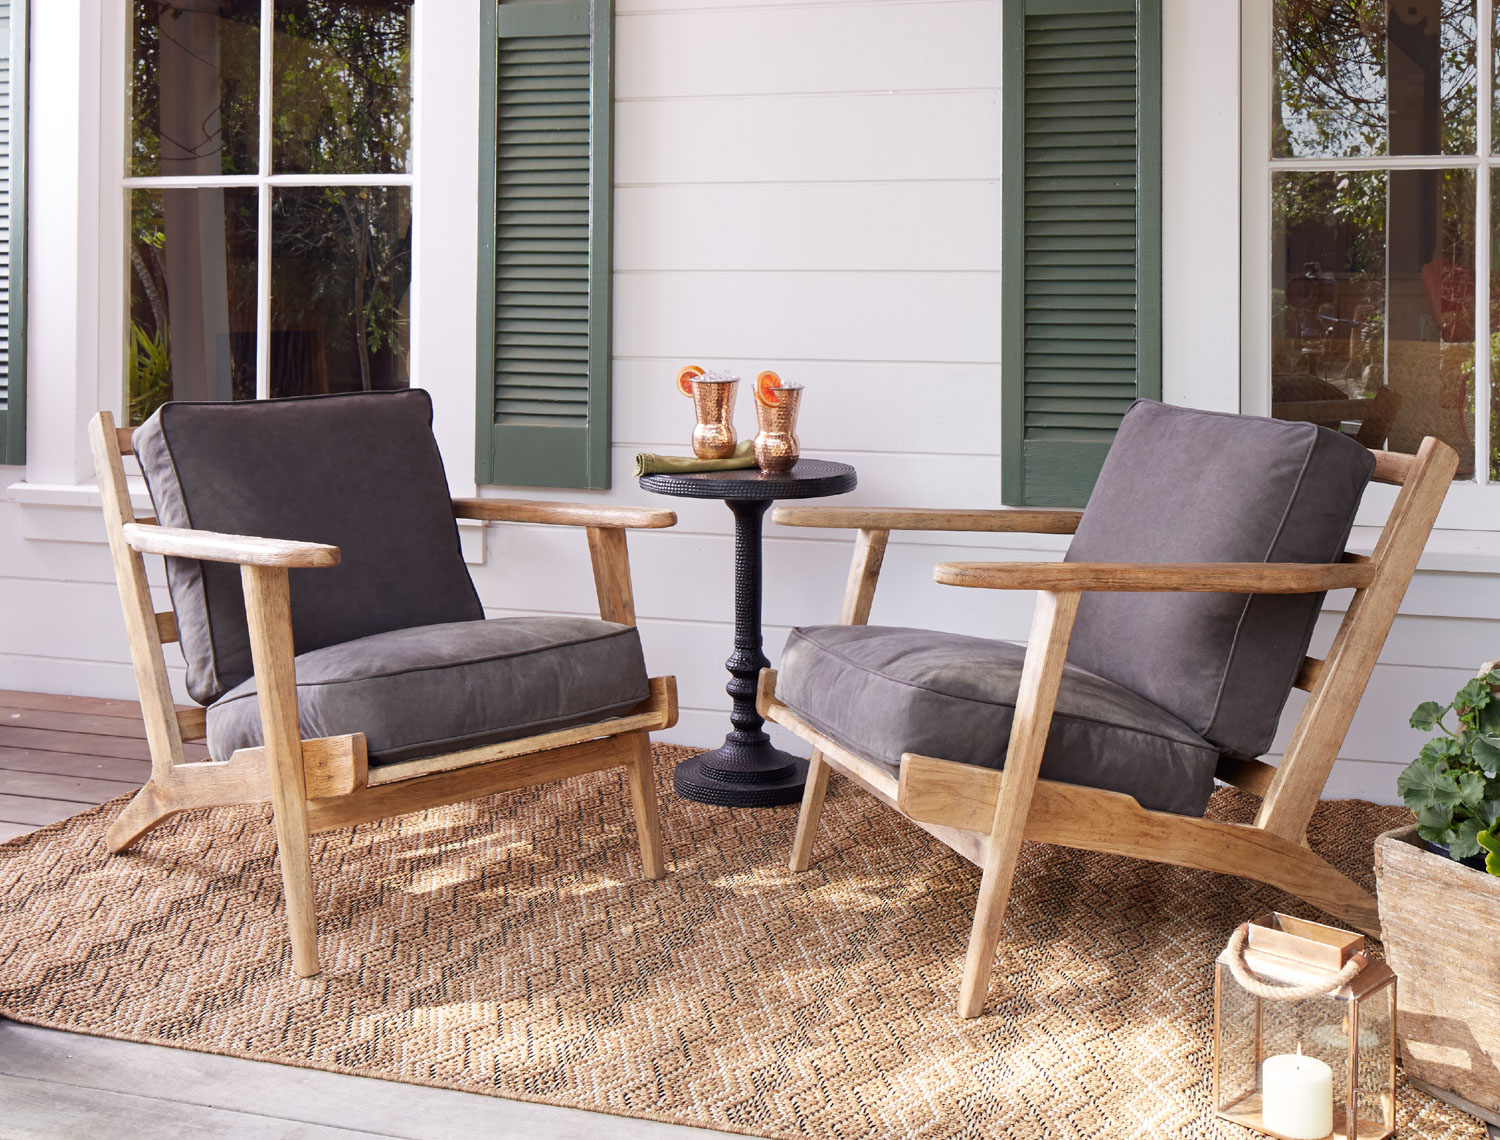 Wood chairs with dark cushions on wood porch in afternoon light San Francisco lifestyle photographer